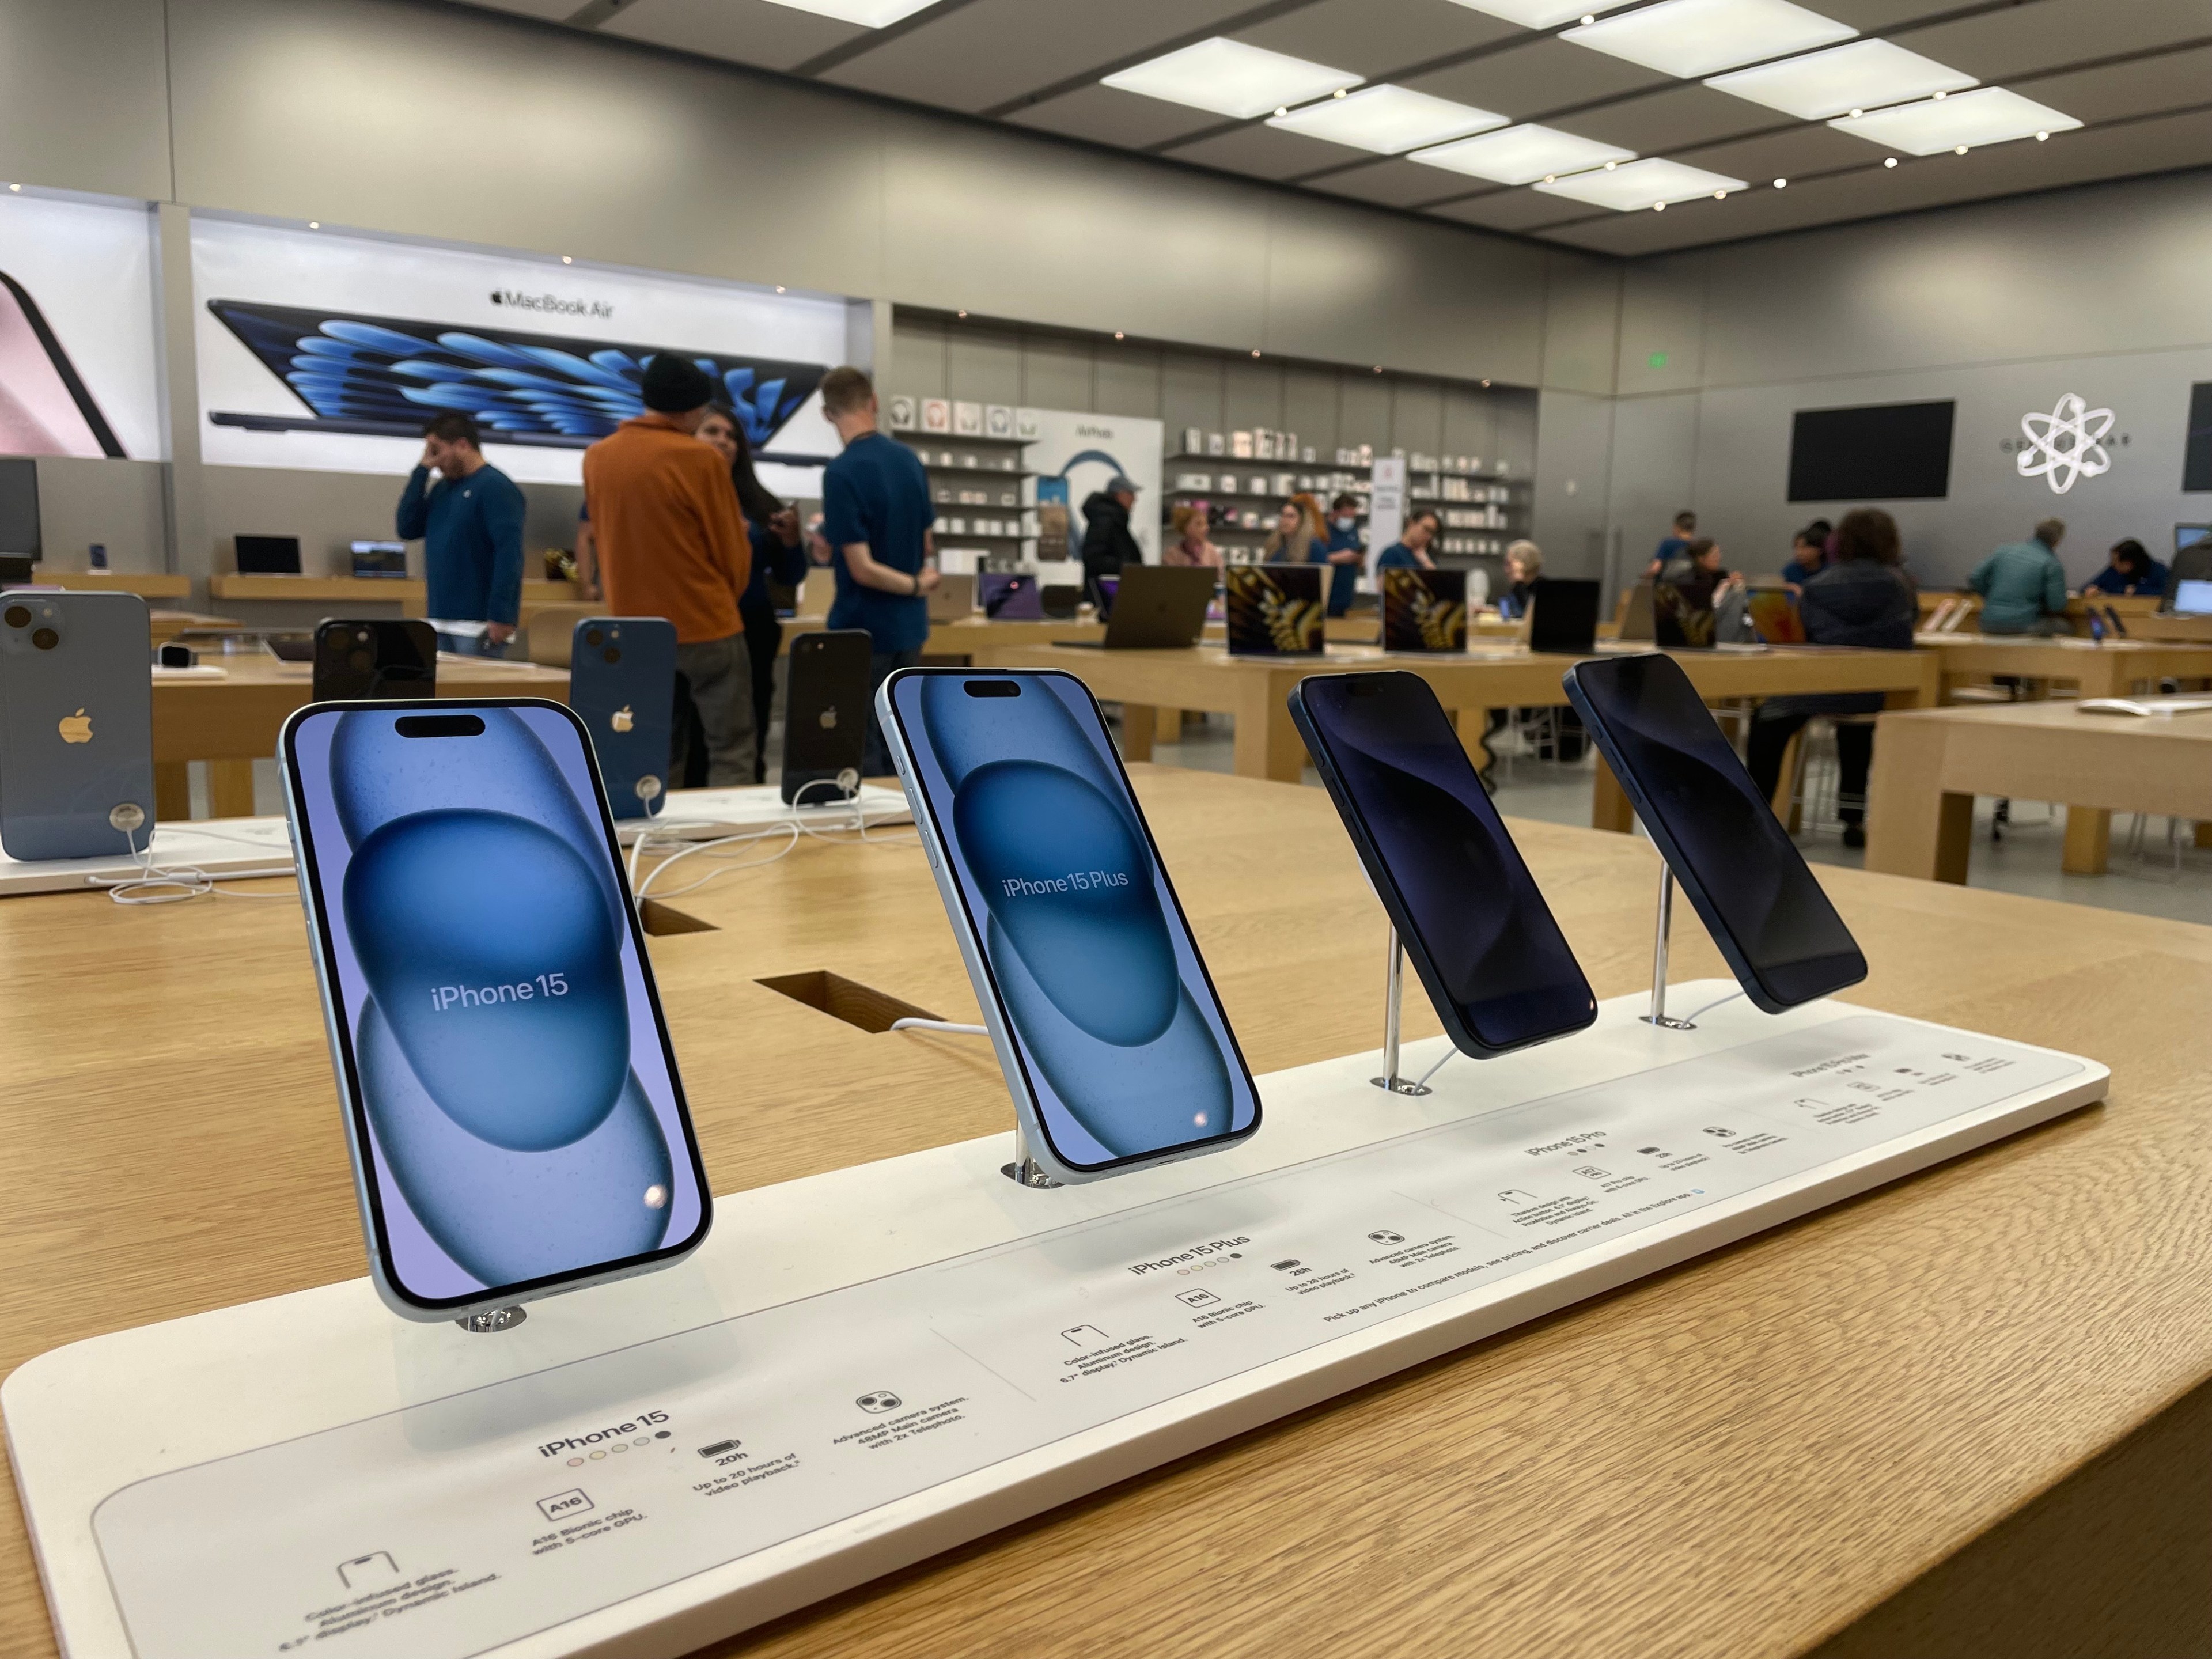 iPhones are displayed inside an Apple Store.